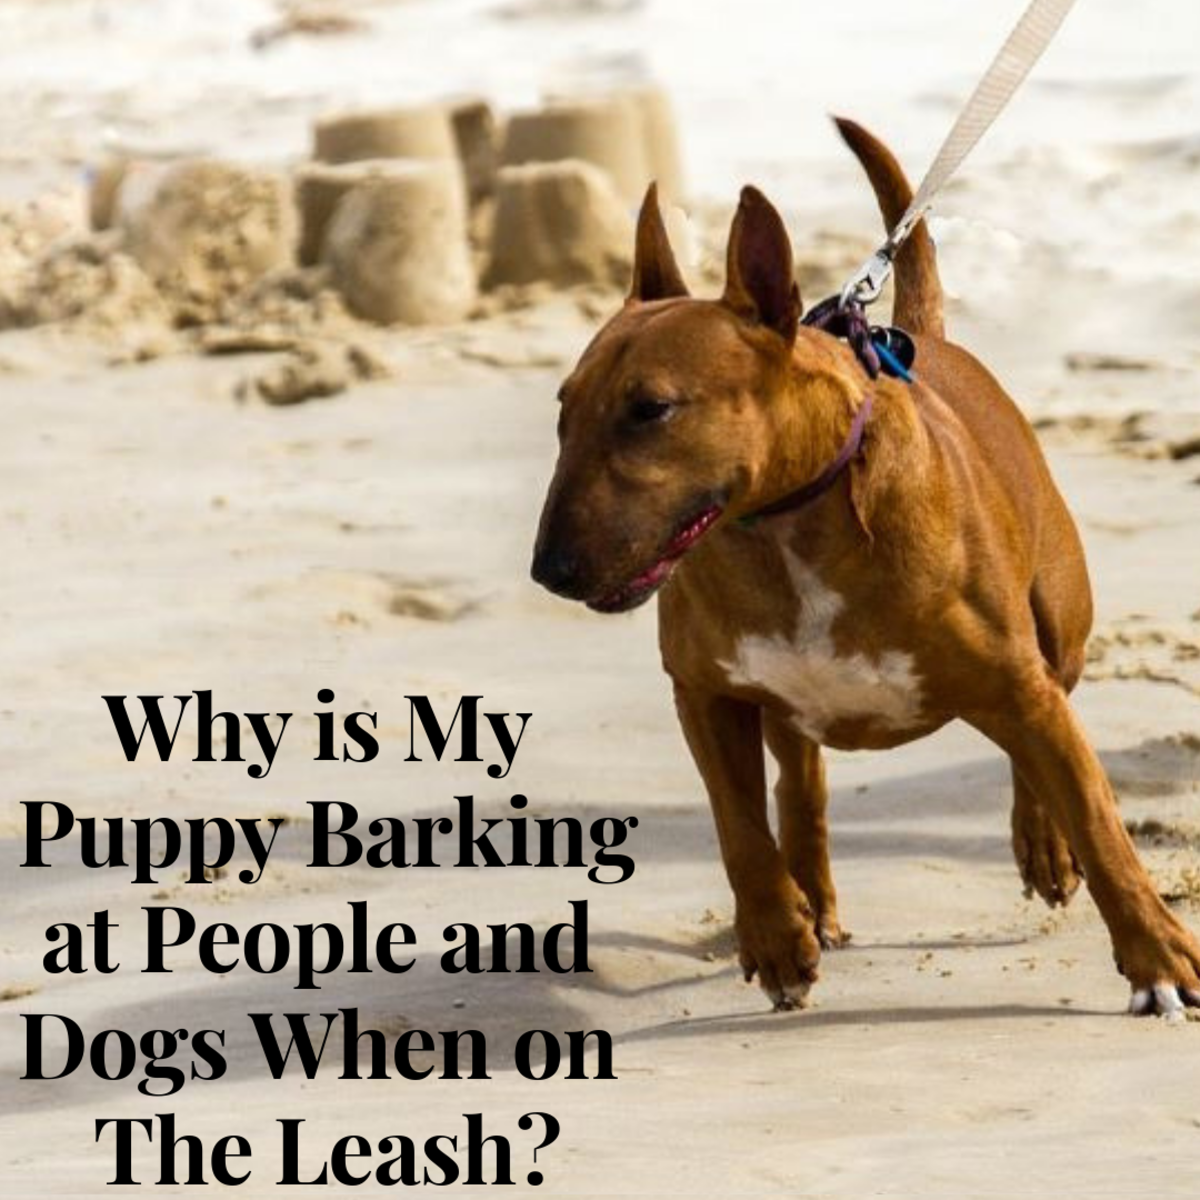 Does your puppy bark at other dogs? FInd out why.